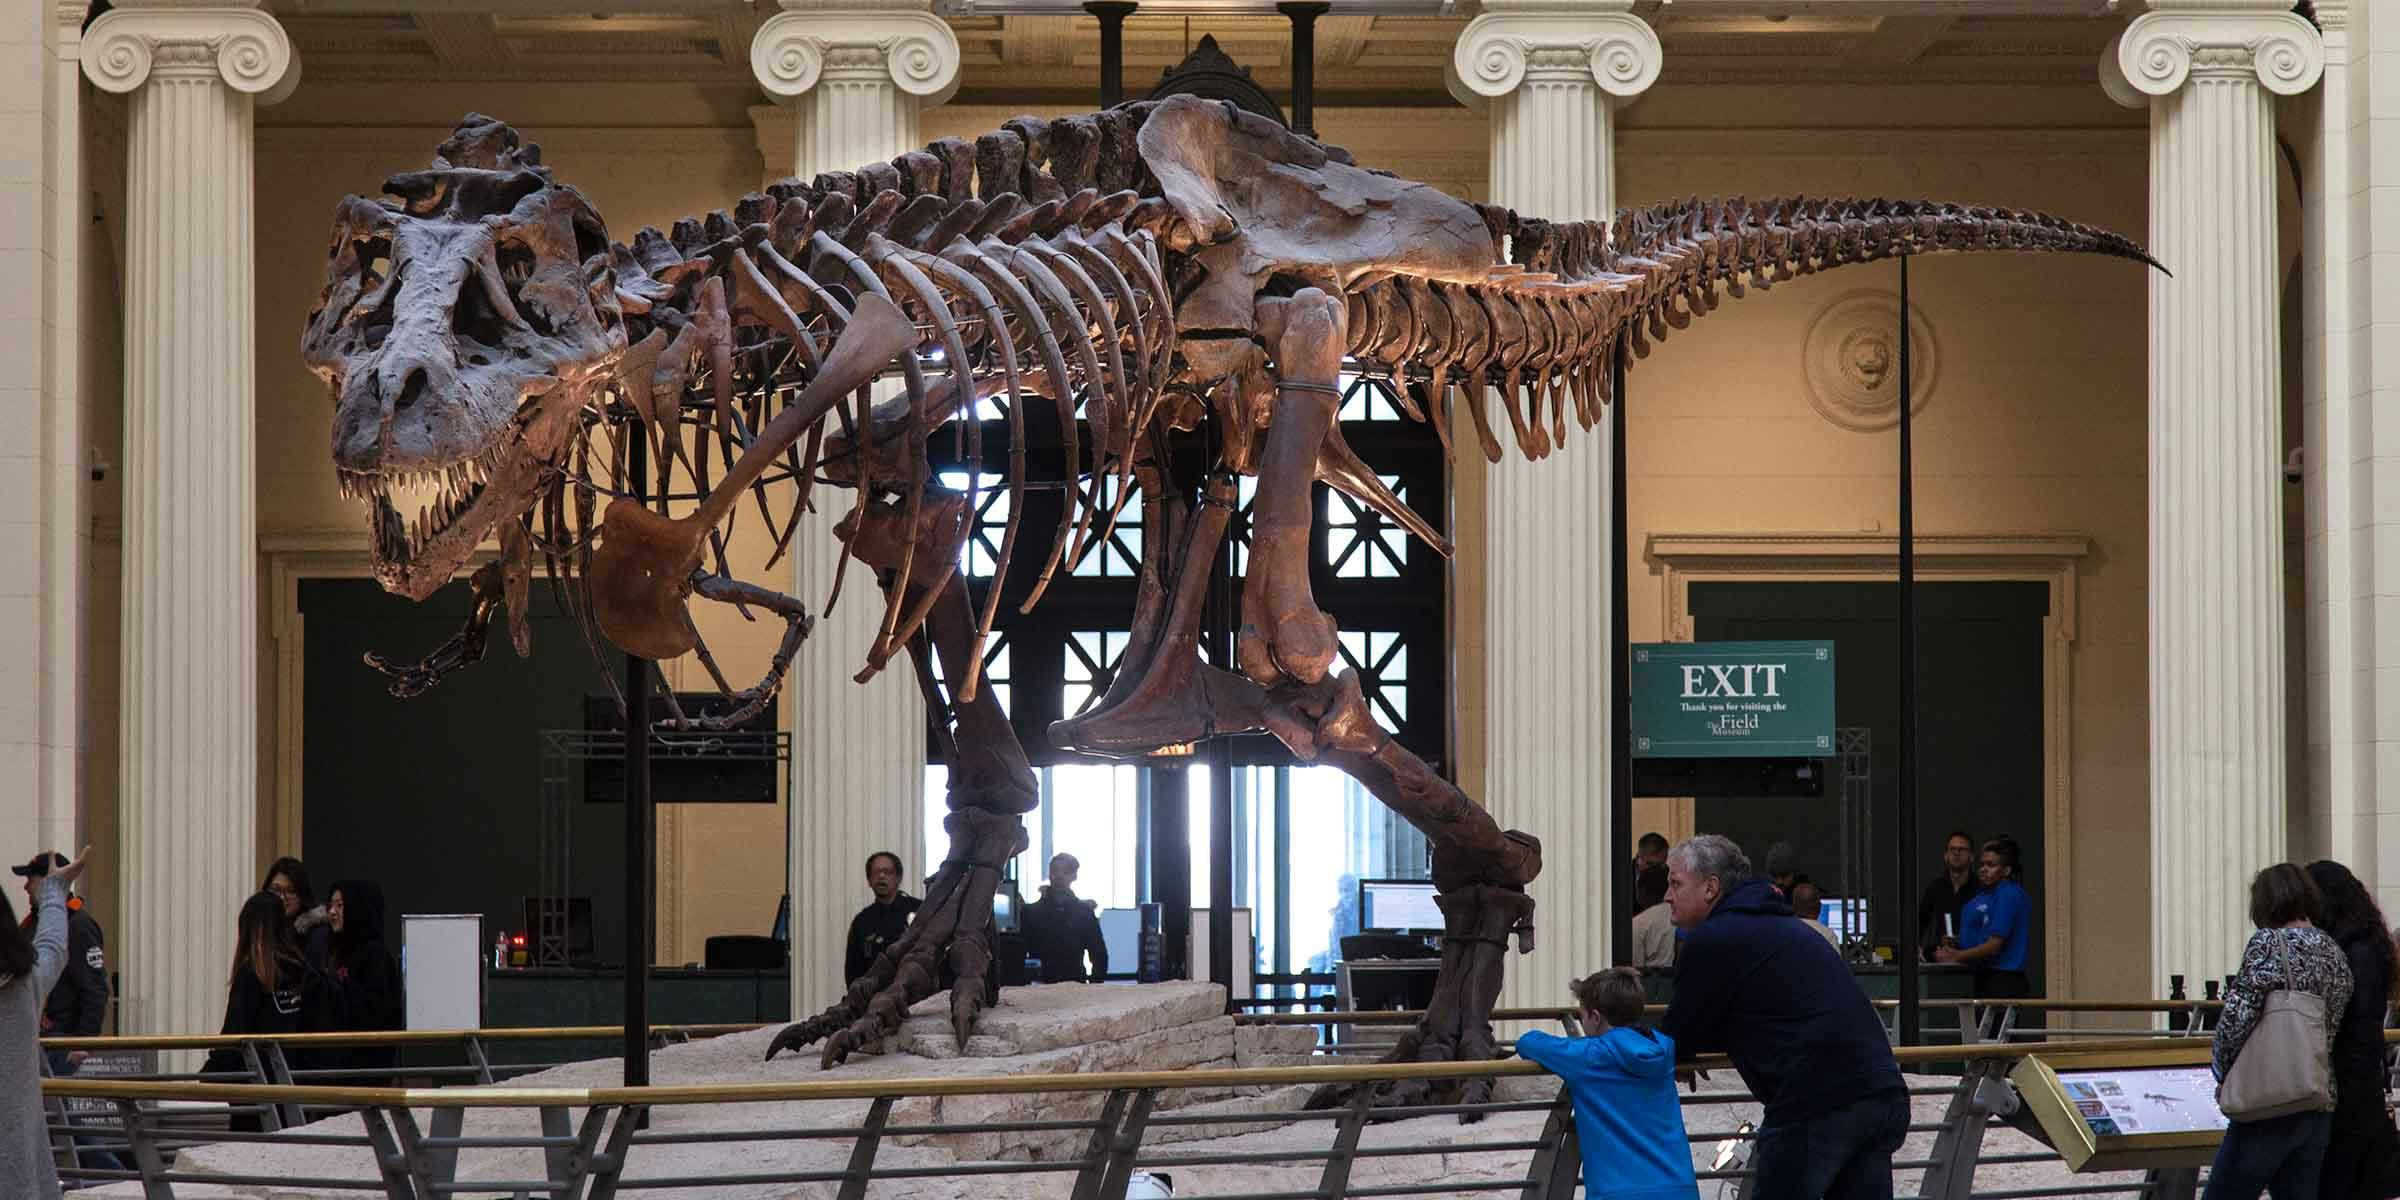 A large T. rex skeleton on display in a museum, with people looking at it and columns in the background